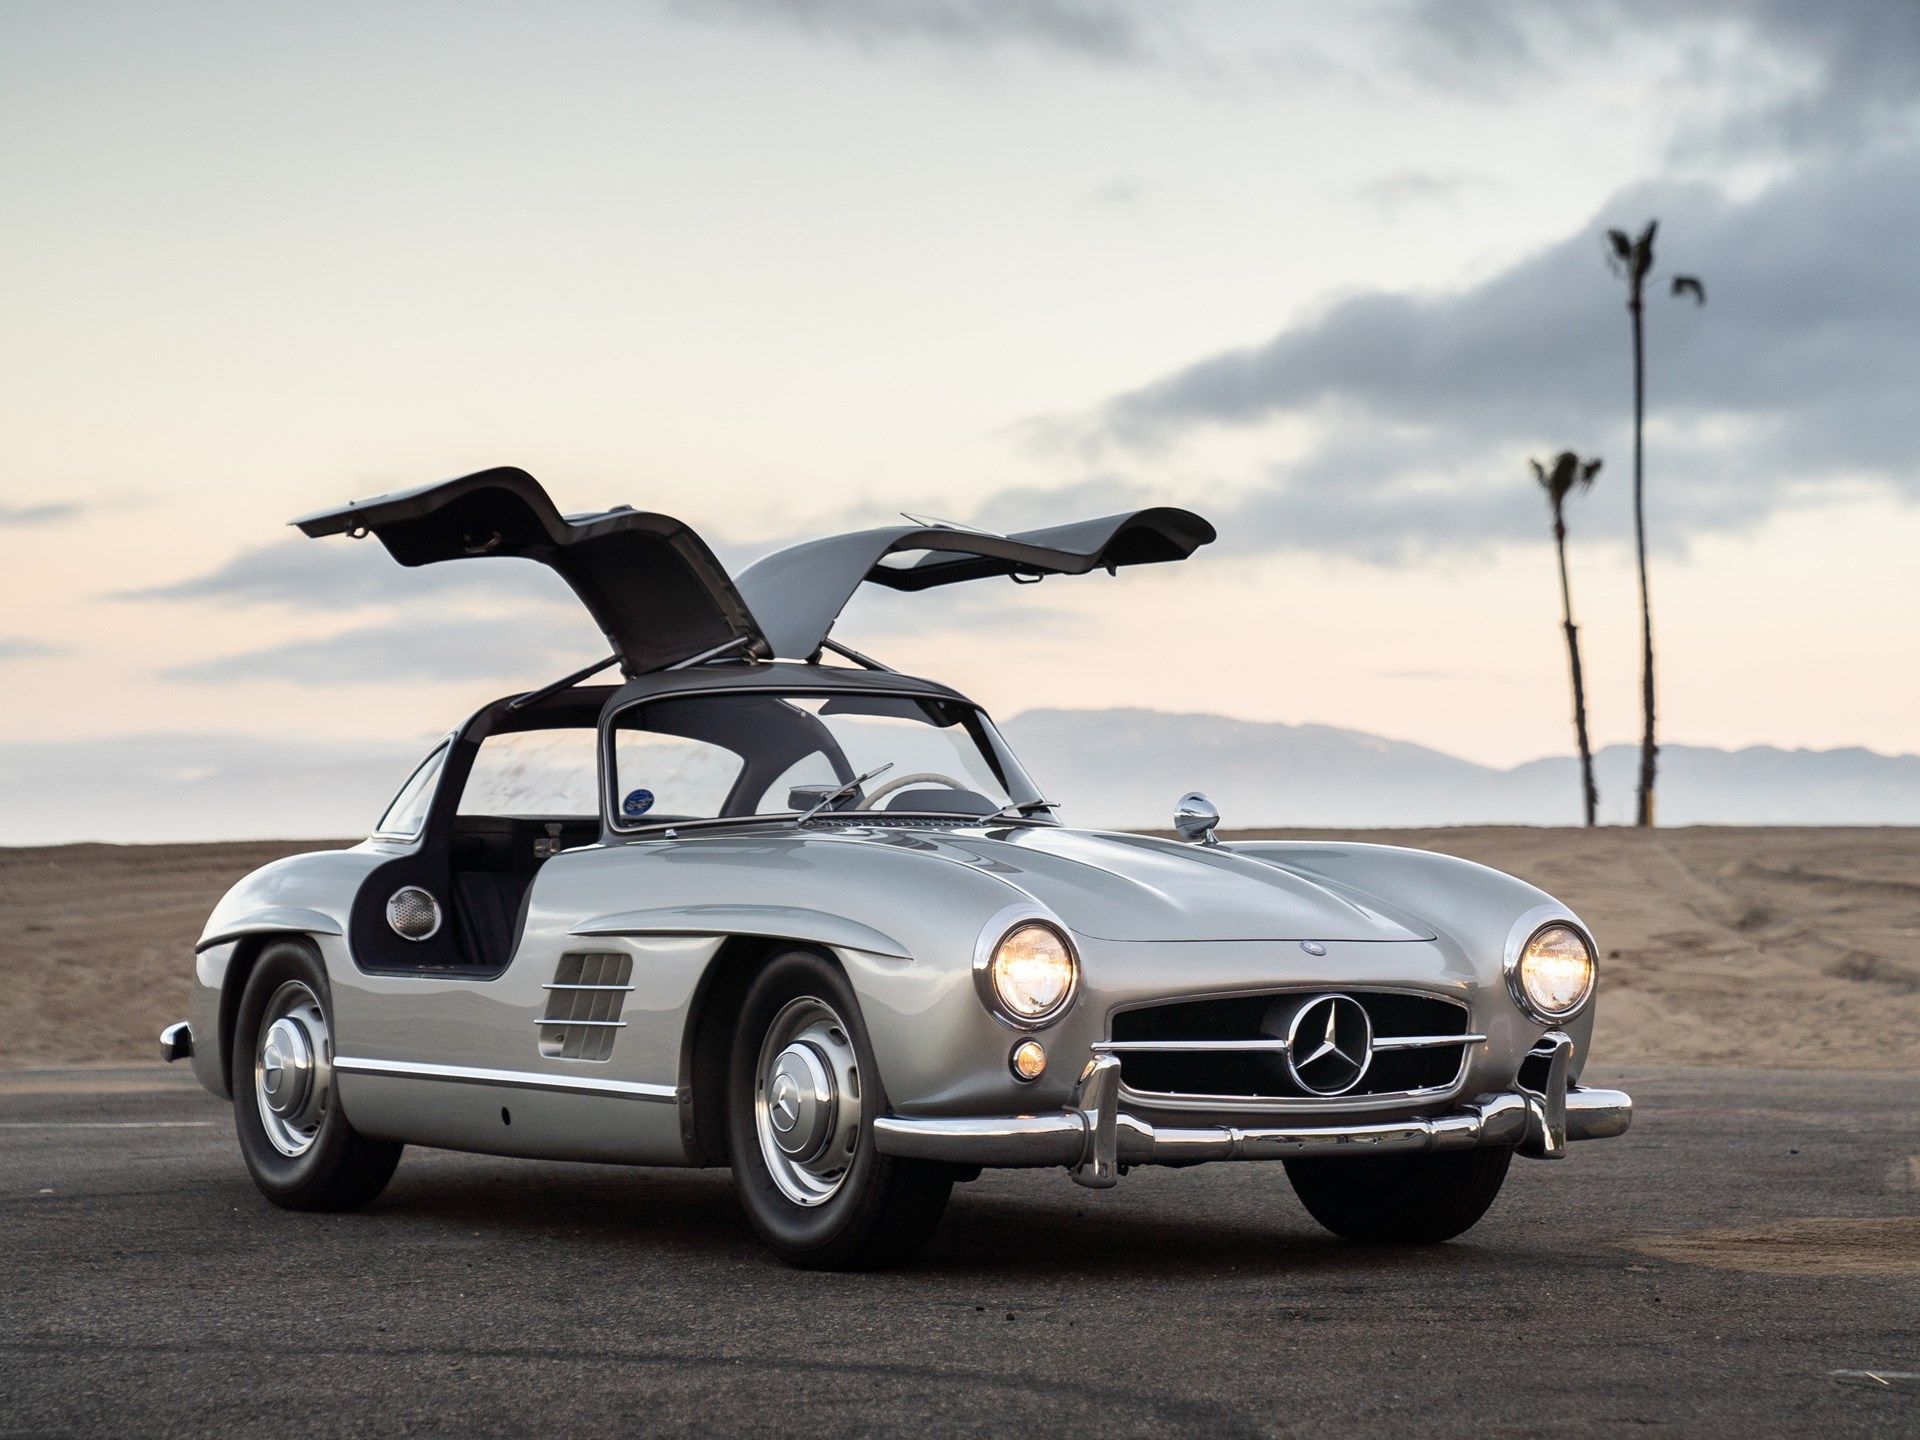 This Mercedes Benz 300SL Gullwing has Moves Like Jagger, but it might not sell big